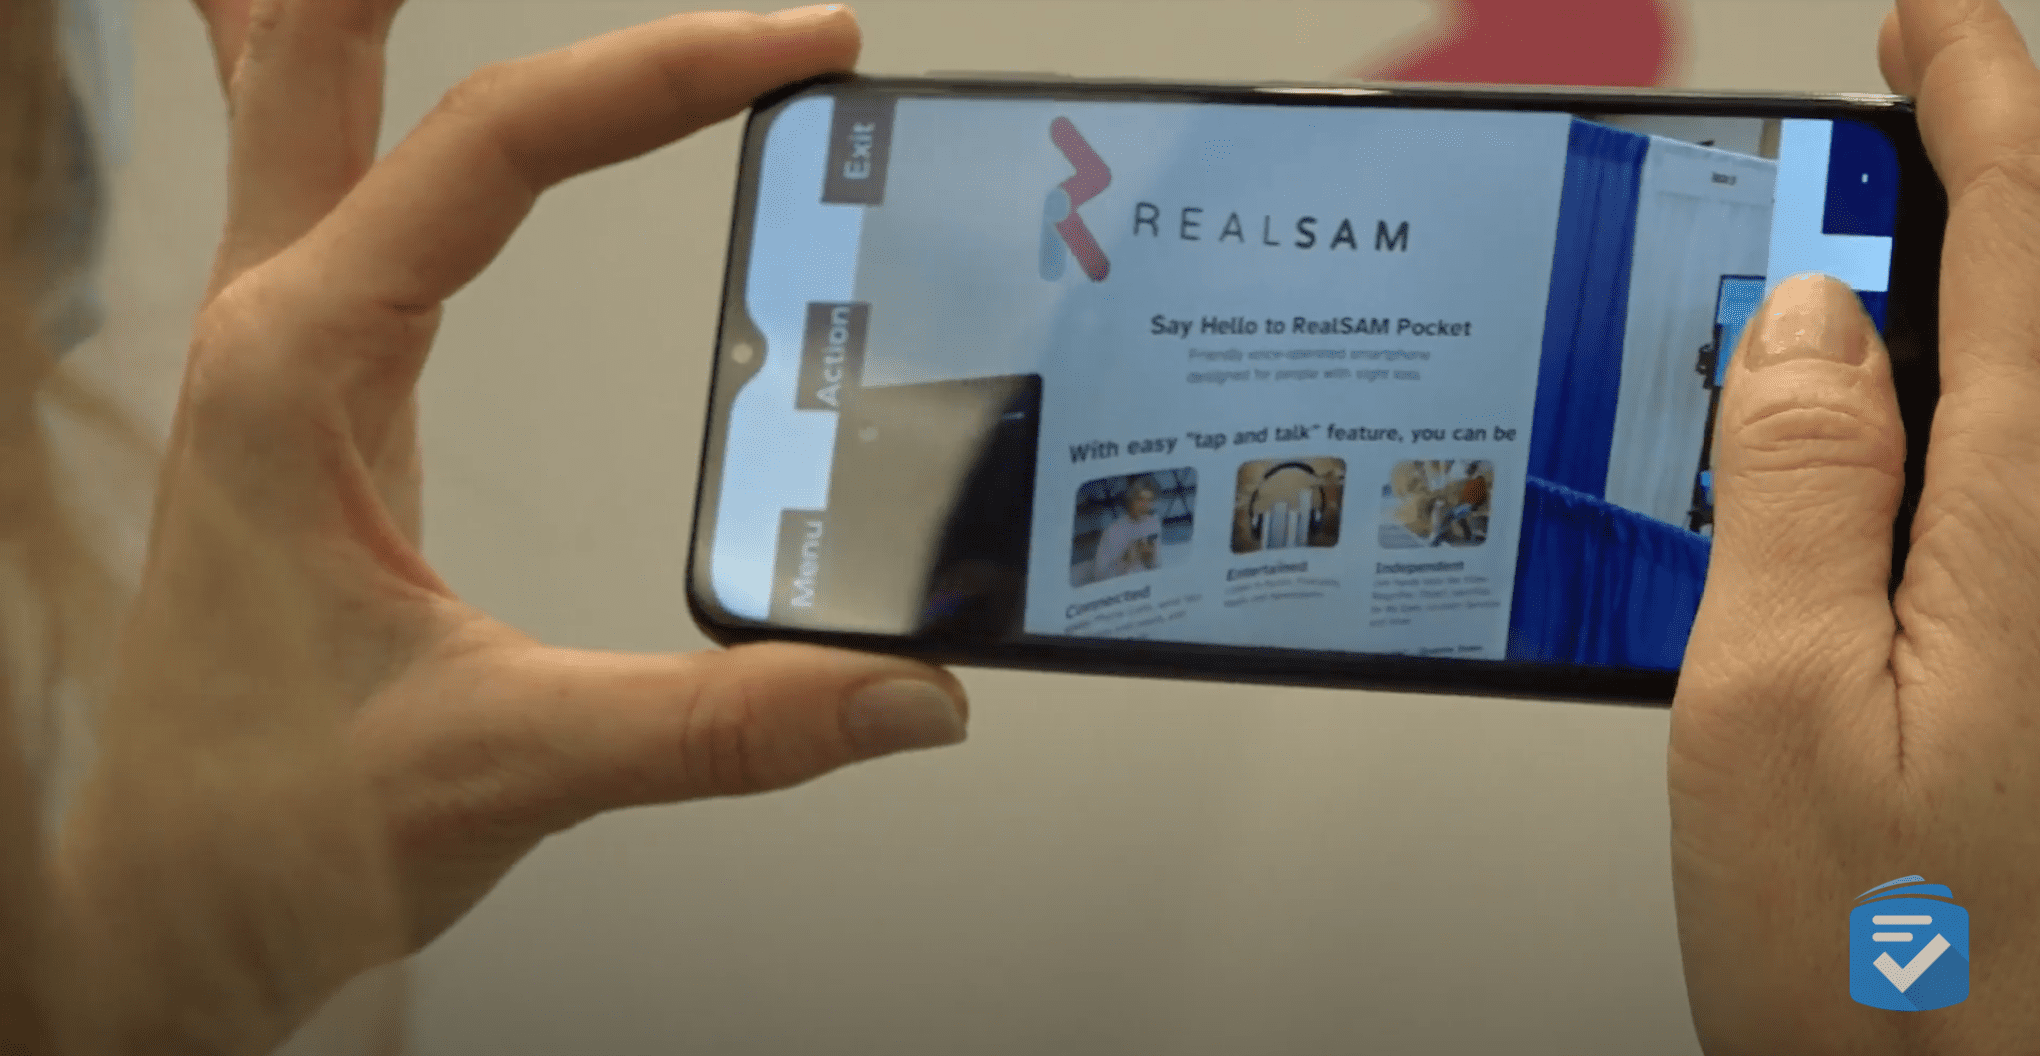 A Behind the Scenes look at the RealSAM Smartphone